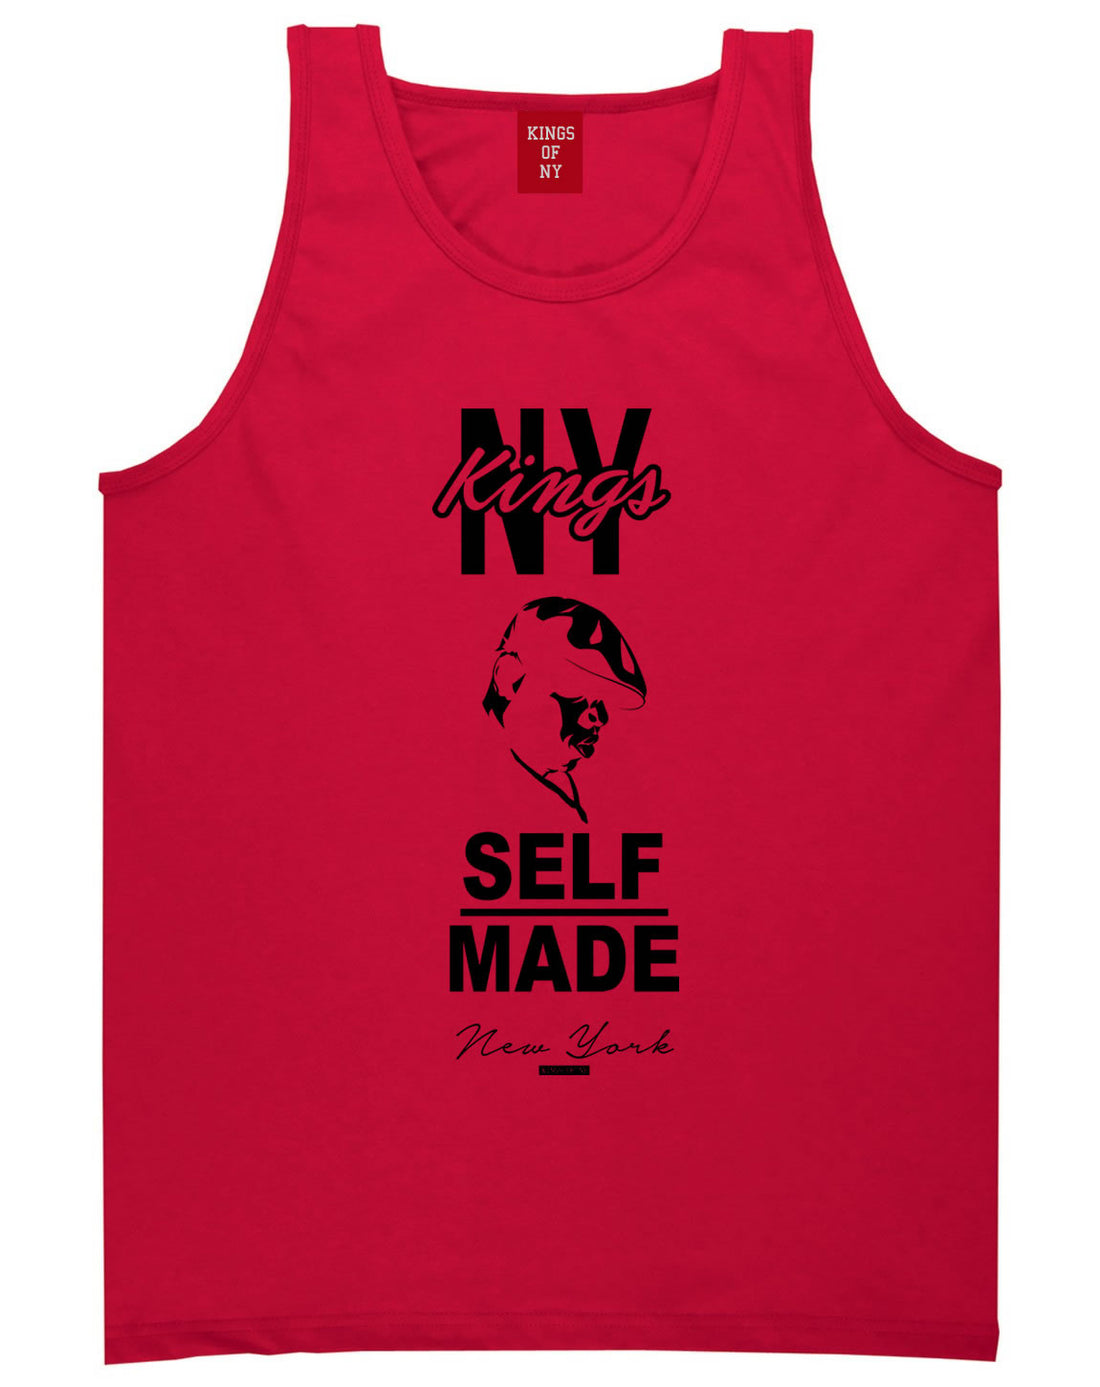 NY Kings Self Made Biggie Tank Top in Red By Kings Of NY